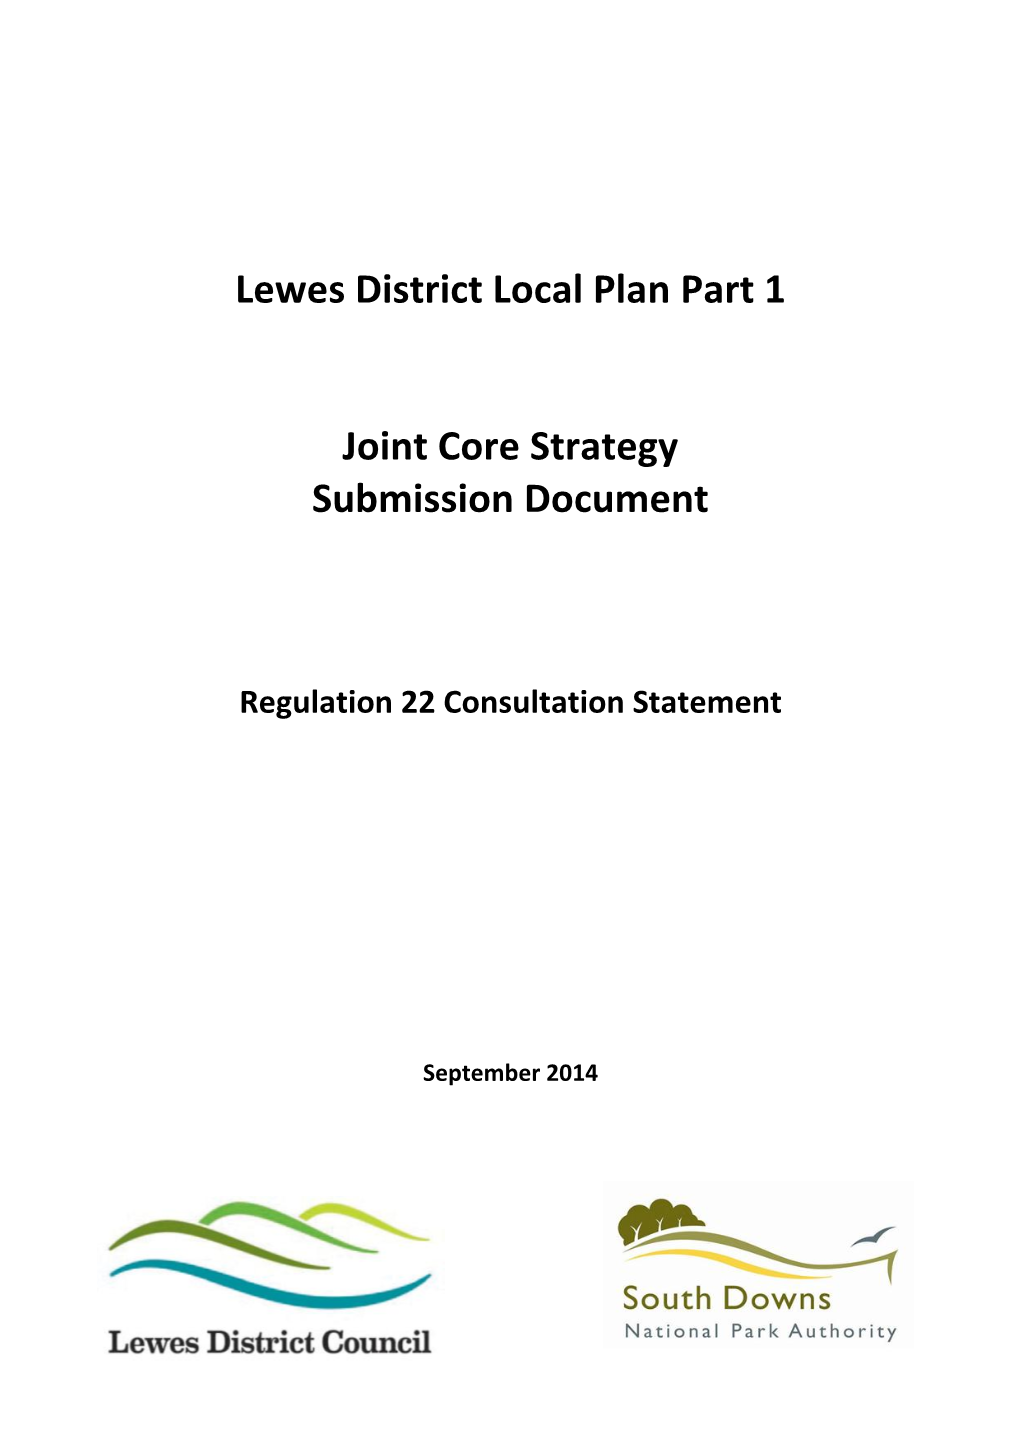 Consultation Statement Submission